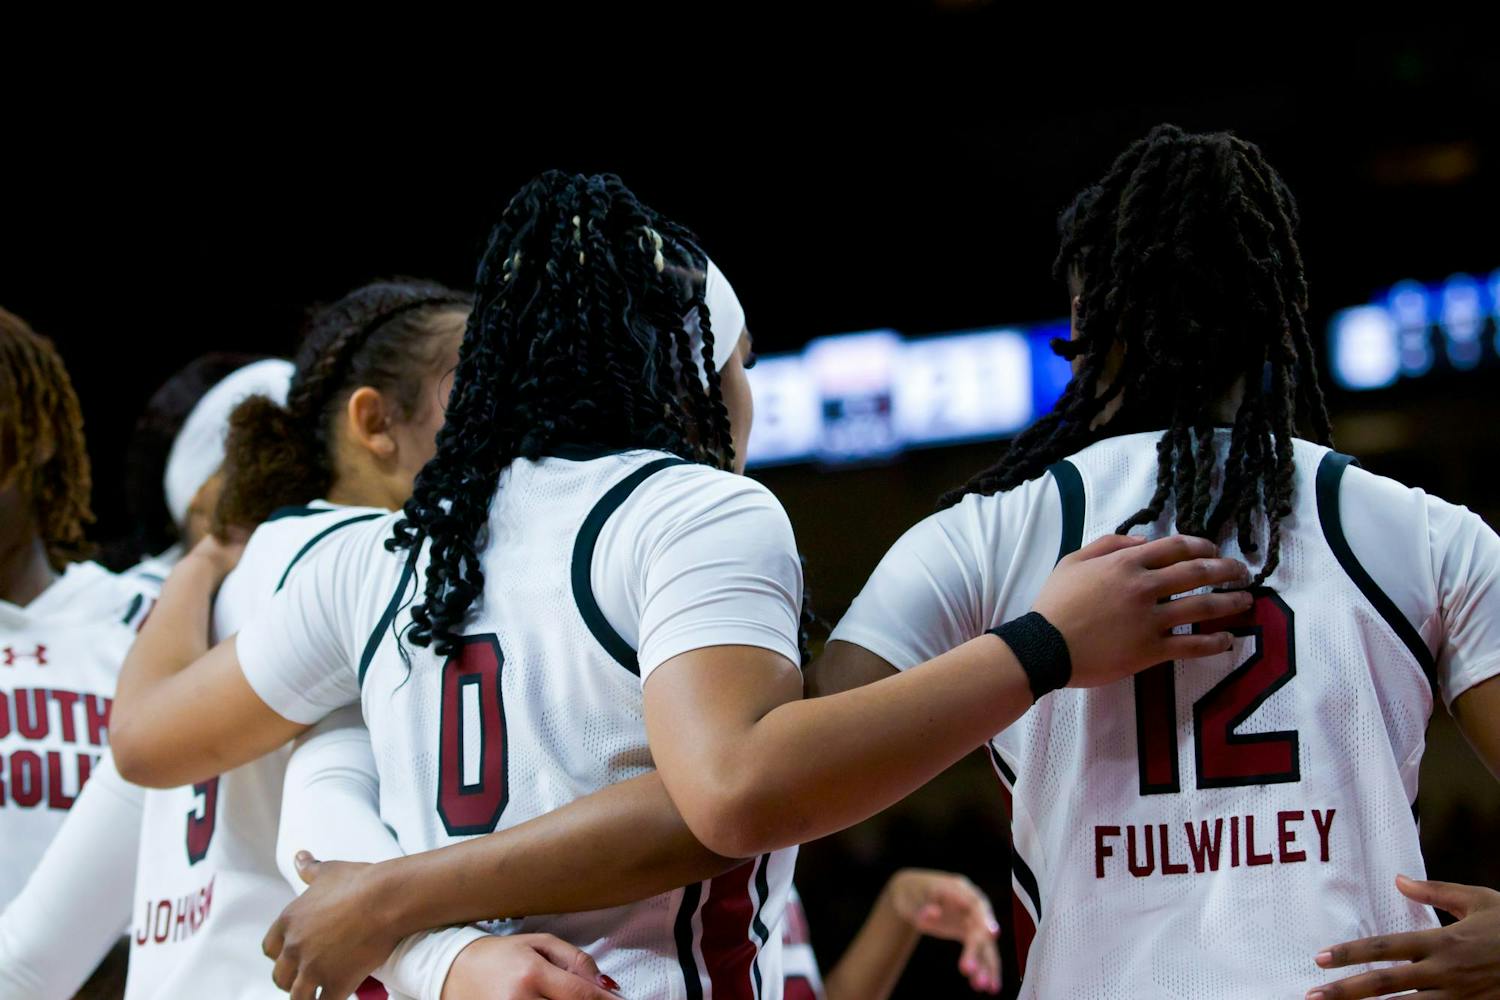 Freshman guard Tessa Johnson, senior guard Te-Hina Paopao and freshman guard MiLaysia Fulwiley huddle together during a timeout against the Wildcats. Combined, the three players attributed 39 points to South Carolina’s score of 98-36 against Kentucky on Jan. 15, 2023.&nbsp;